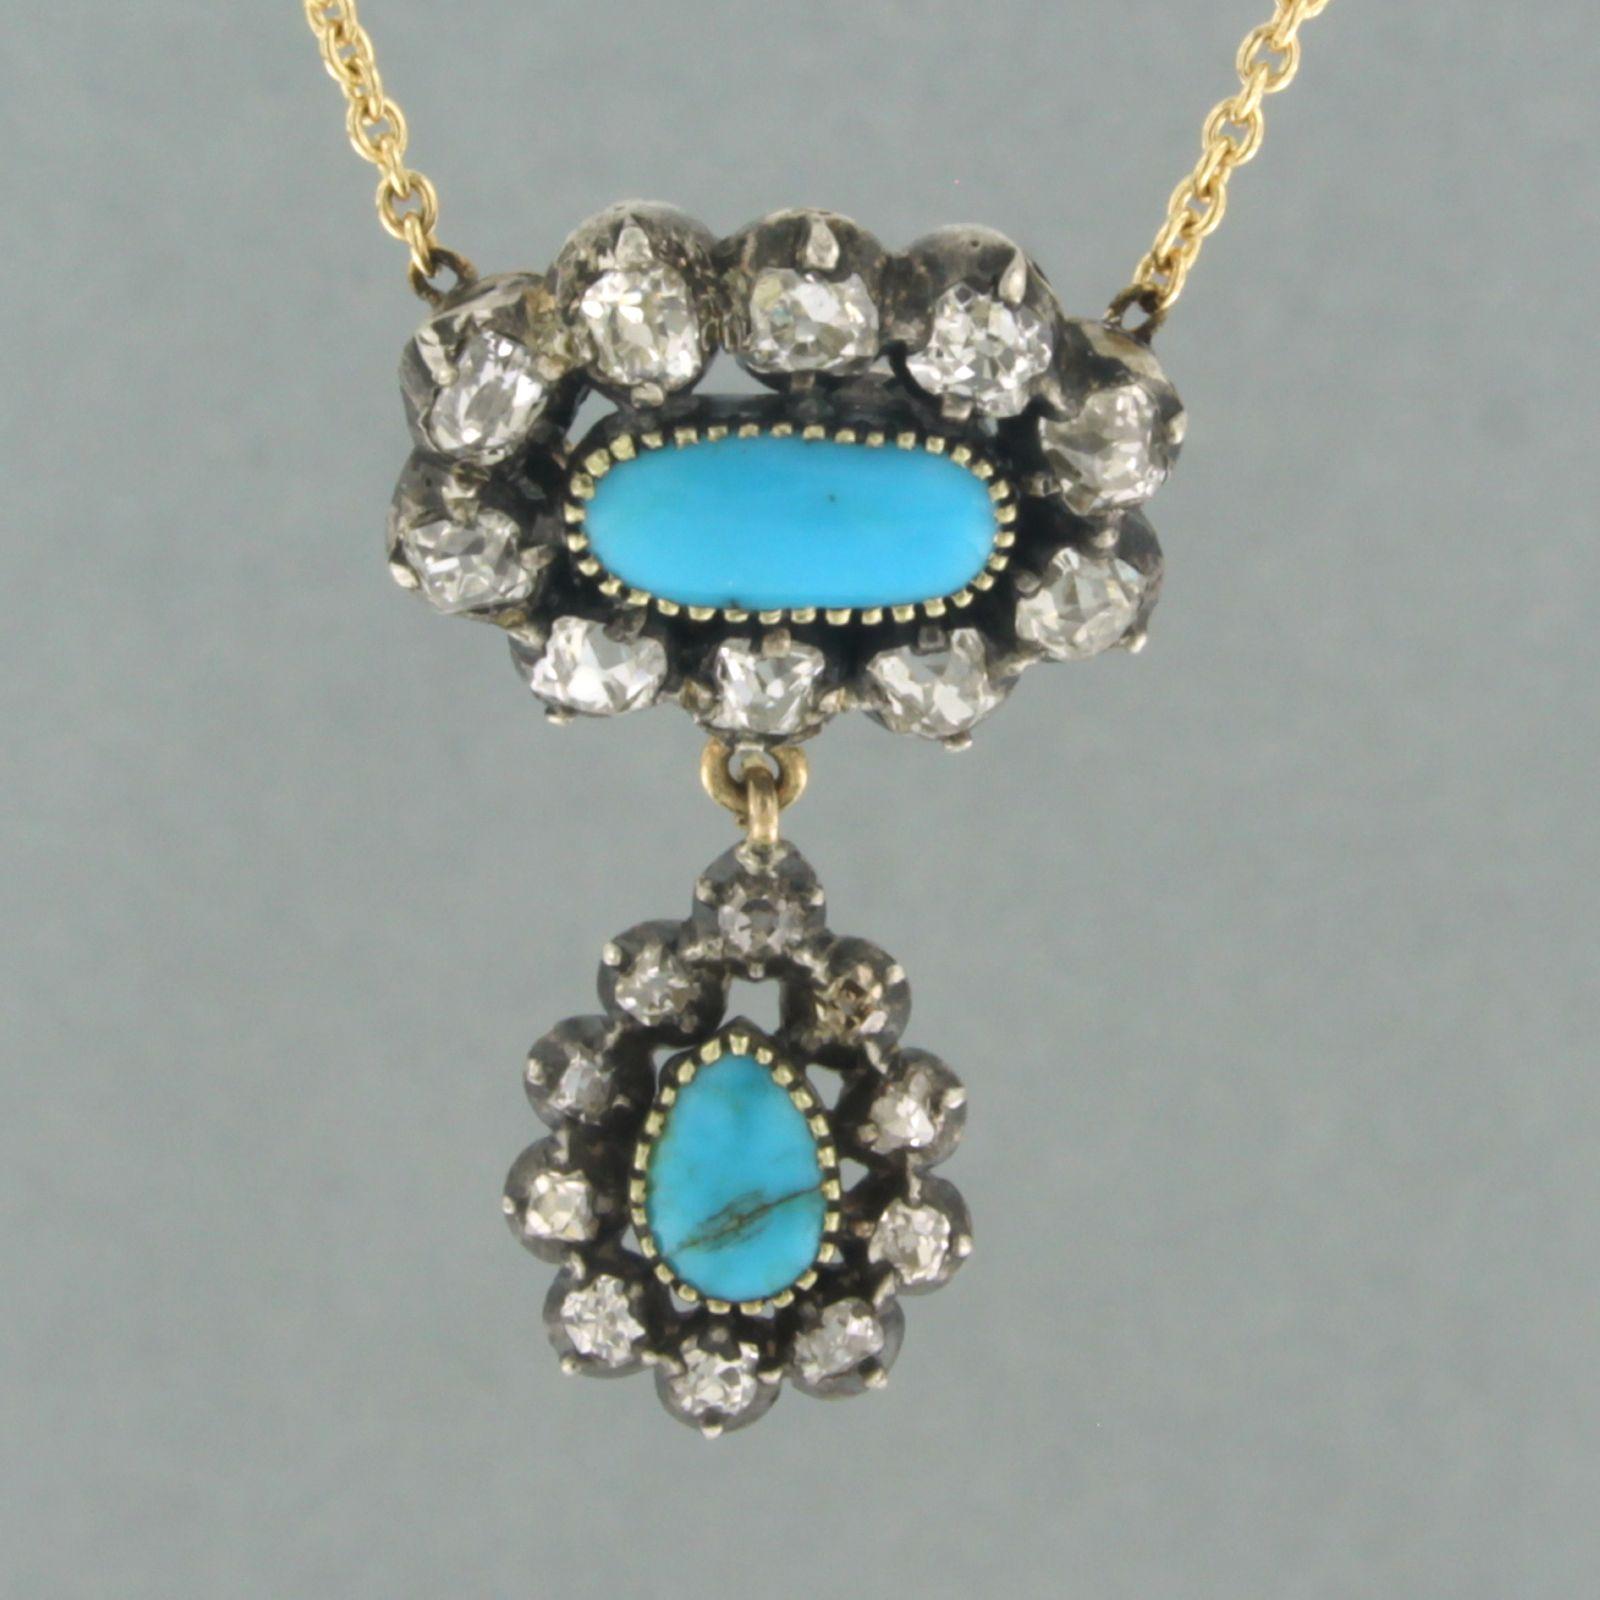 18k yellow gold necklace with 18k gold with Z2 silver pendant set with turquoise and old mine cut diamond 1.50 ct F/G SI - 40 cm

Detailed description

the necklace is 40 cm long and 0.7 mm wide

The size of the pendant is 3.0 cm high and 1.8 cm